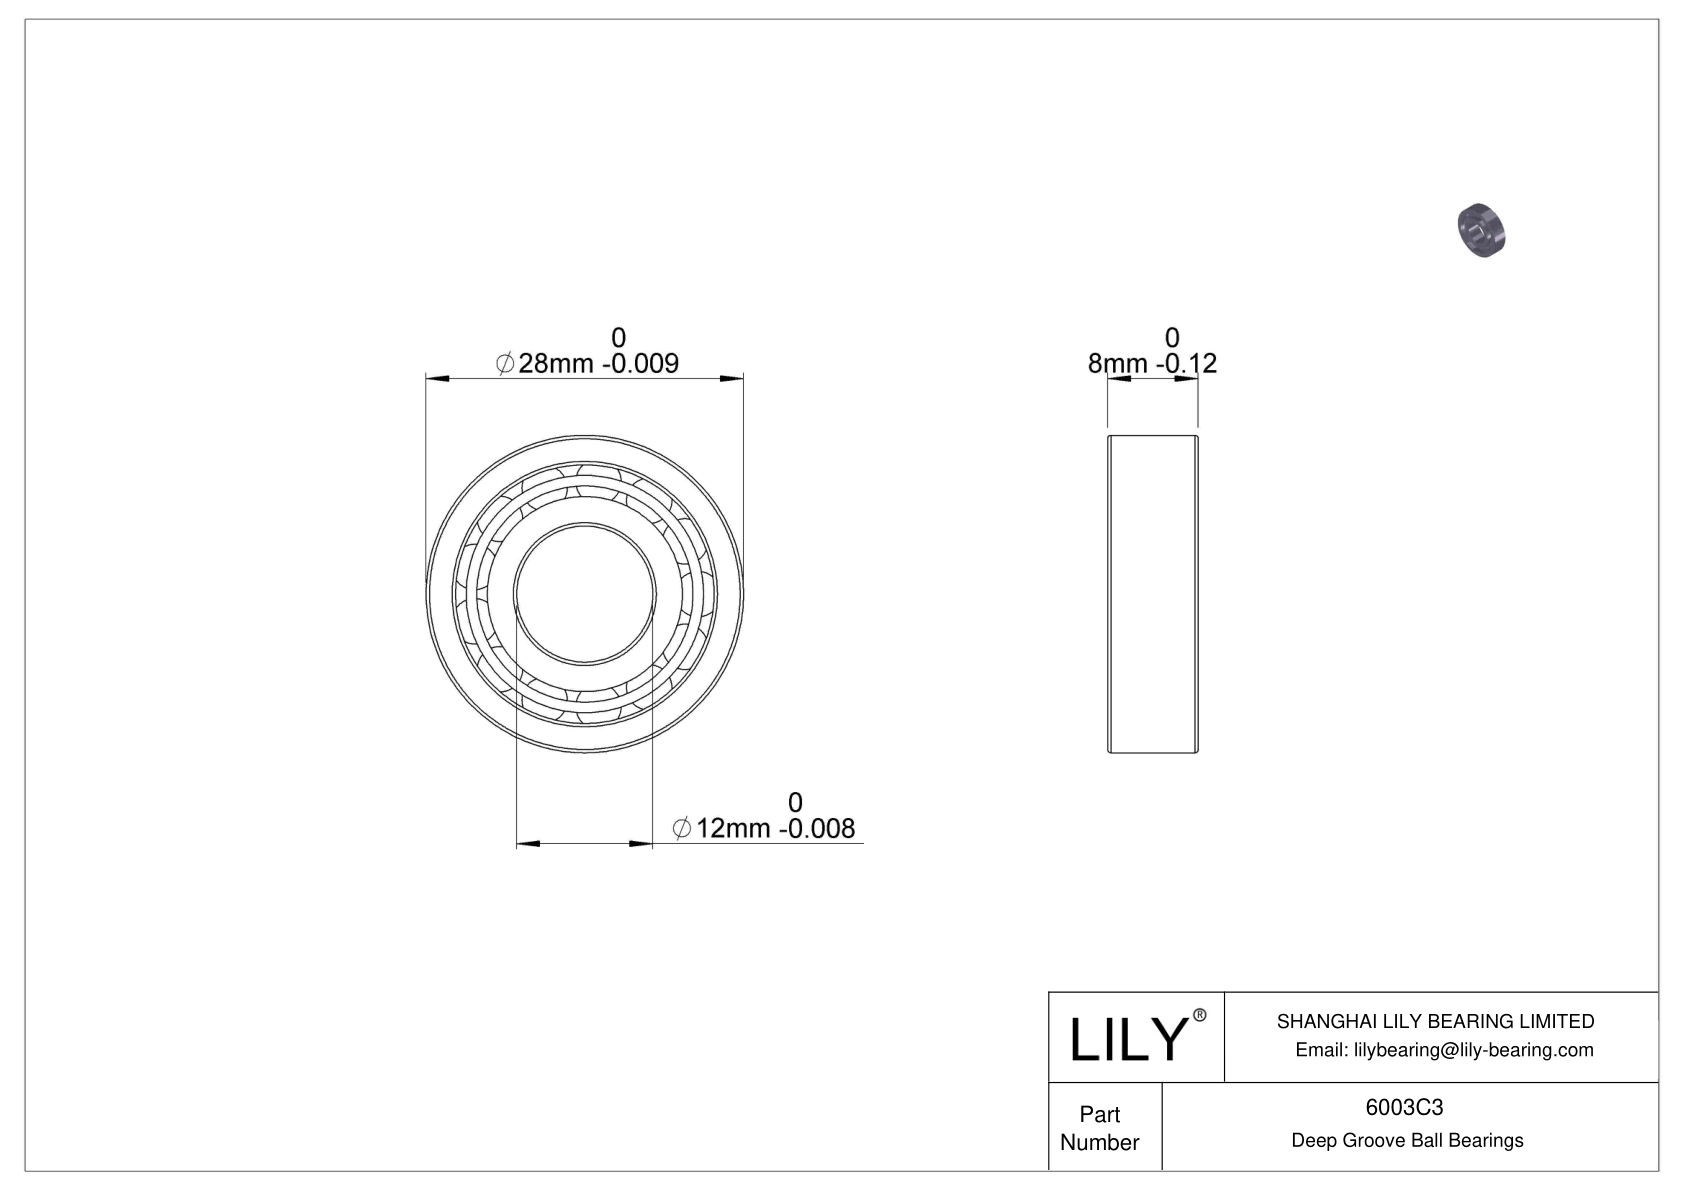 6003C3 Corrosion Resistant Deep Groove Ball Bearings cad drawing